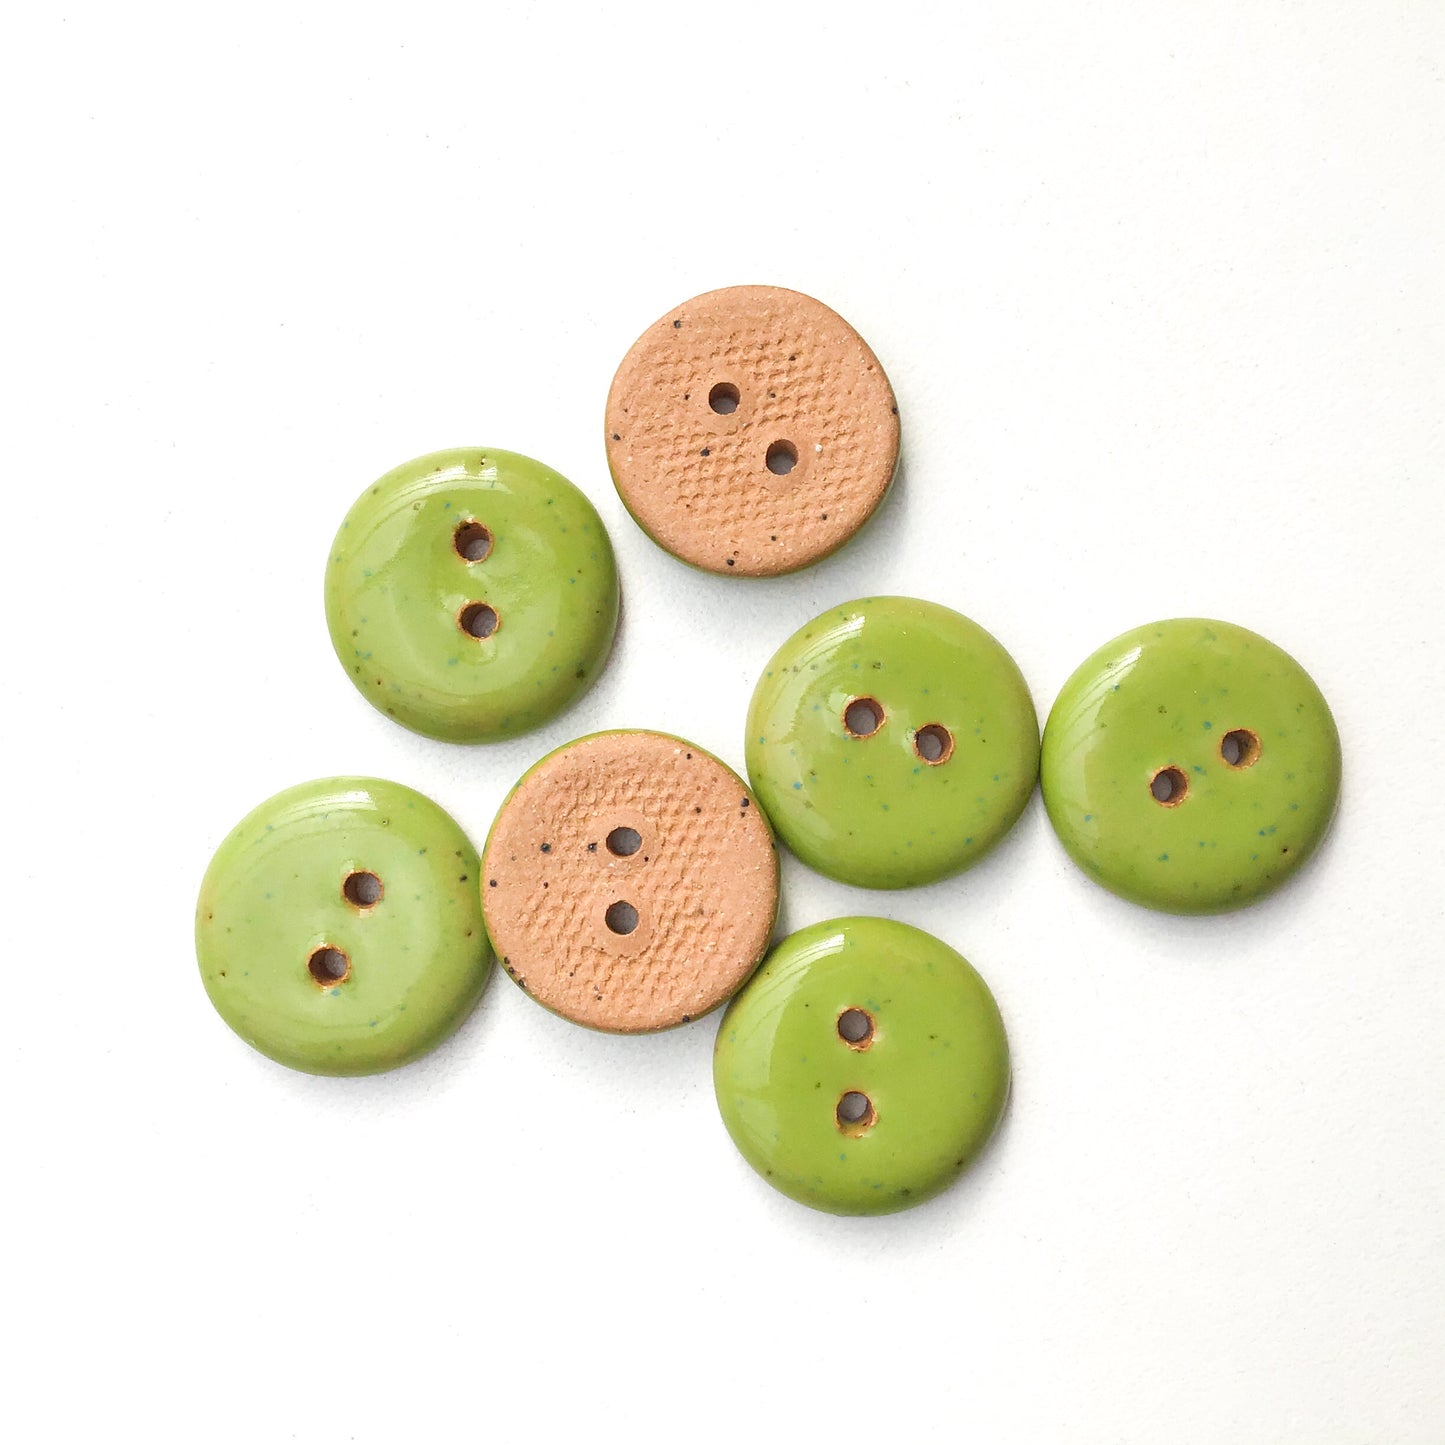 Speckled Apple Green Ceramic Buttons - Bright Green Clay Buttons - 3/4" - 7 Pack (ws-202)